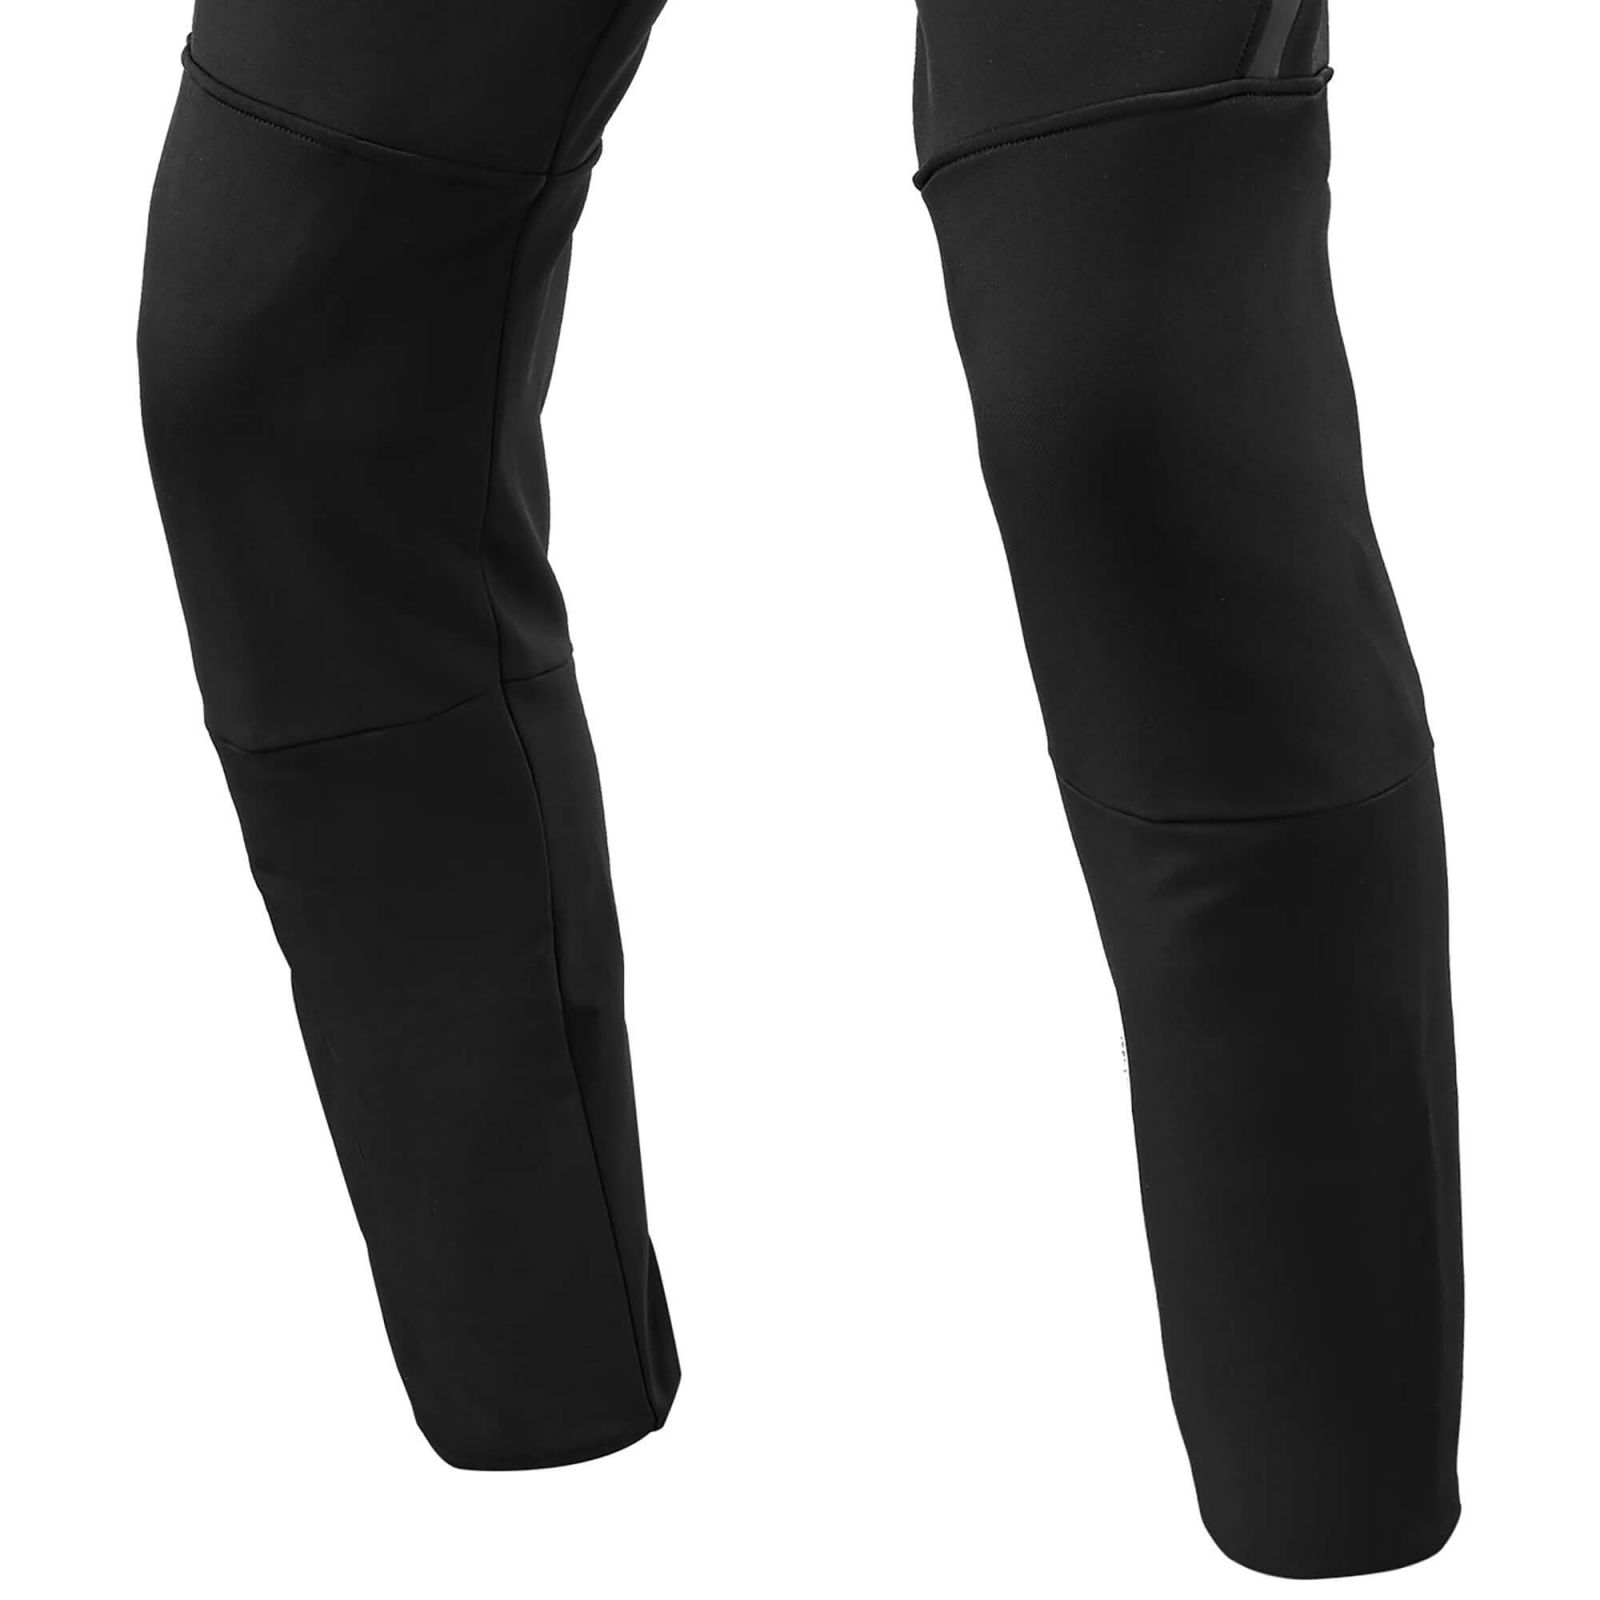 Parabolica Motorcycle Pants  Casual looks yet proper protection for urban  riding.